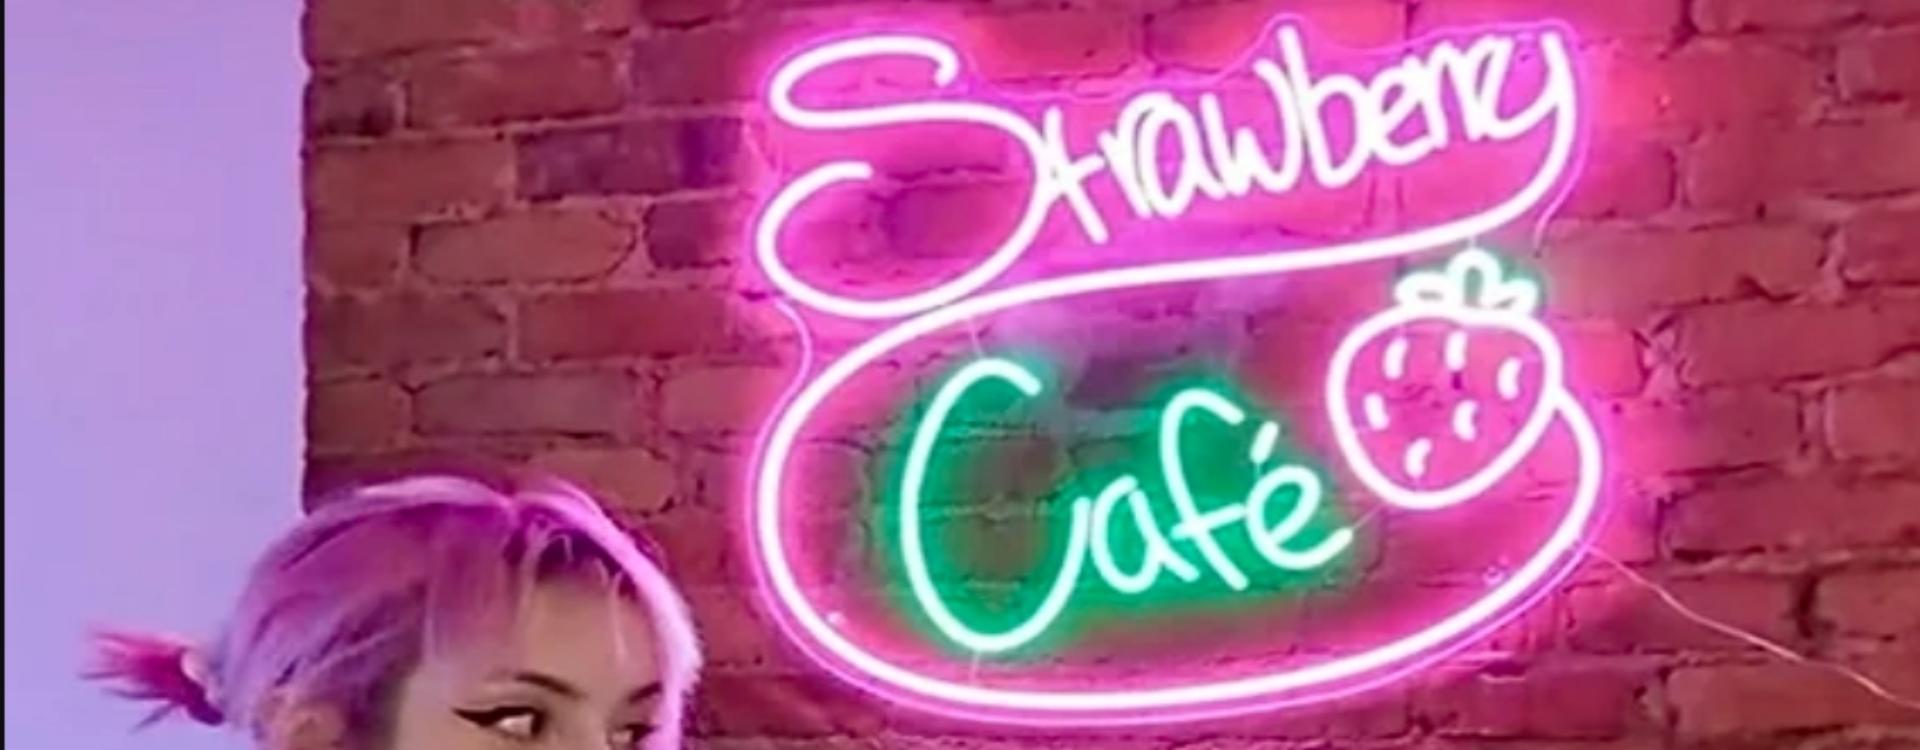 Customizing a Unique Neon Sign for Strawberry Cafe